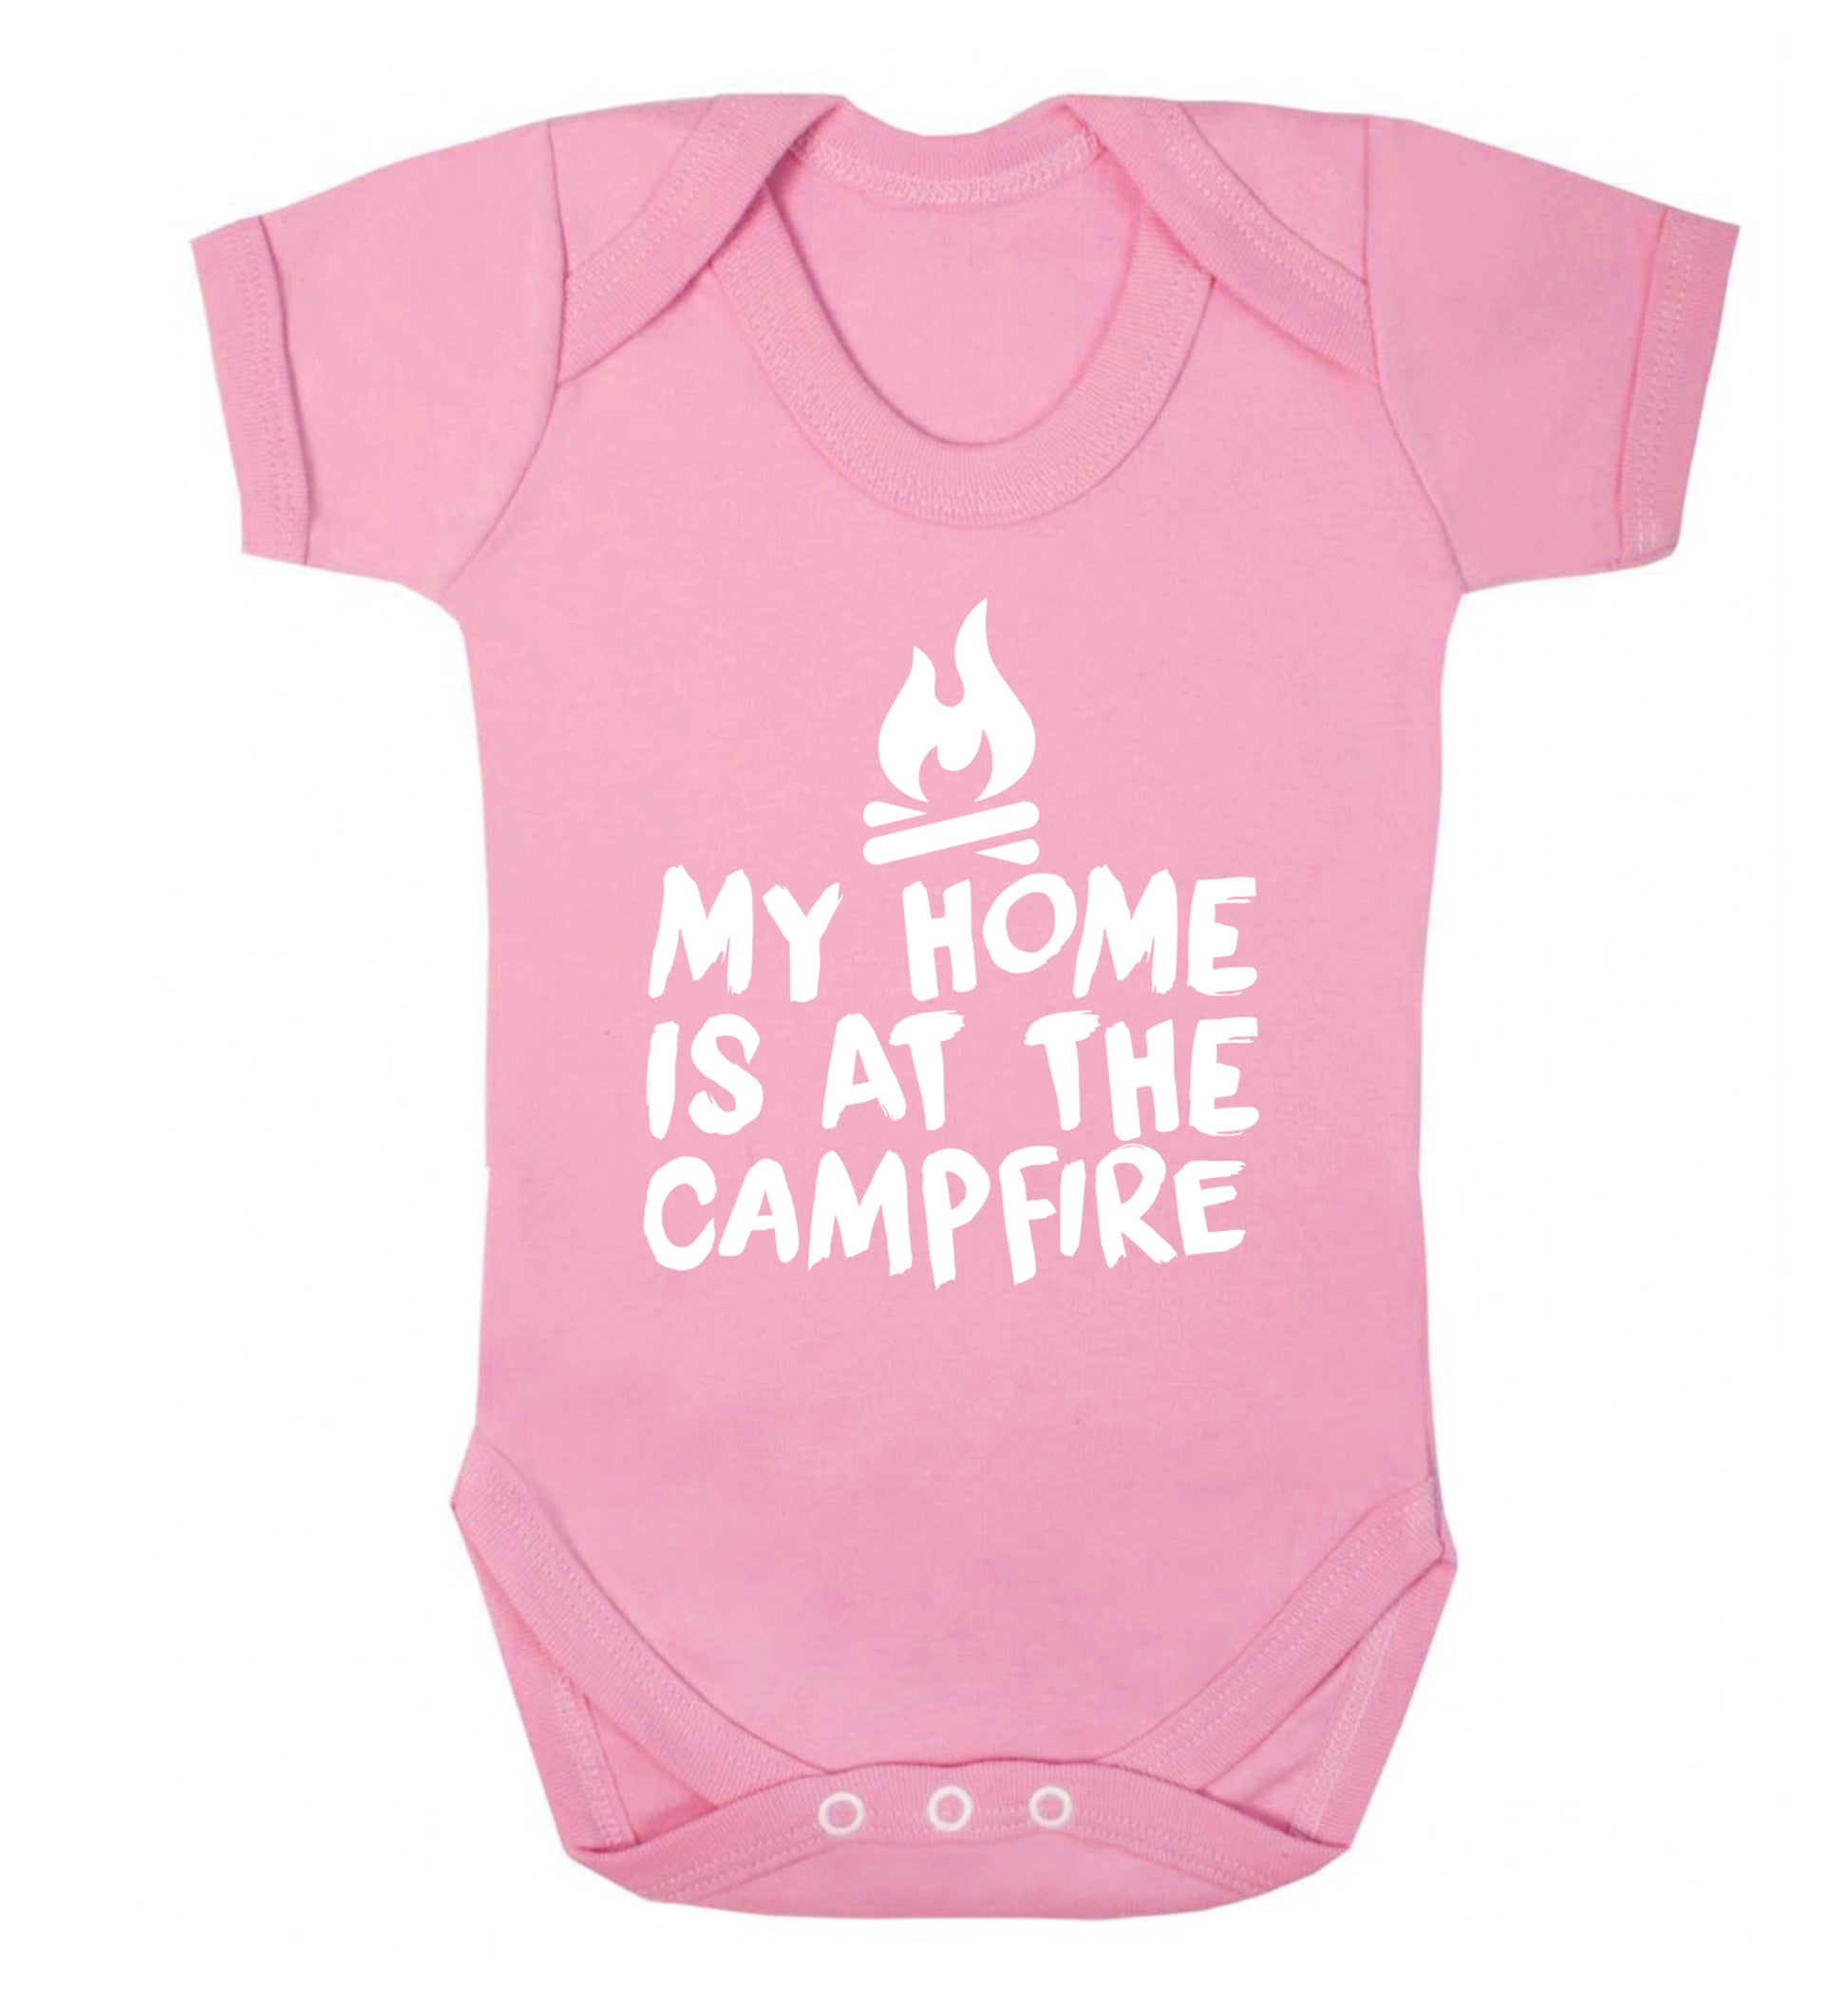 My home is at the campfire Baby Vest pale pink 18-24 months